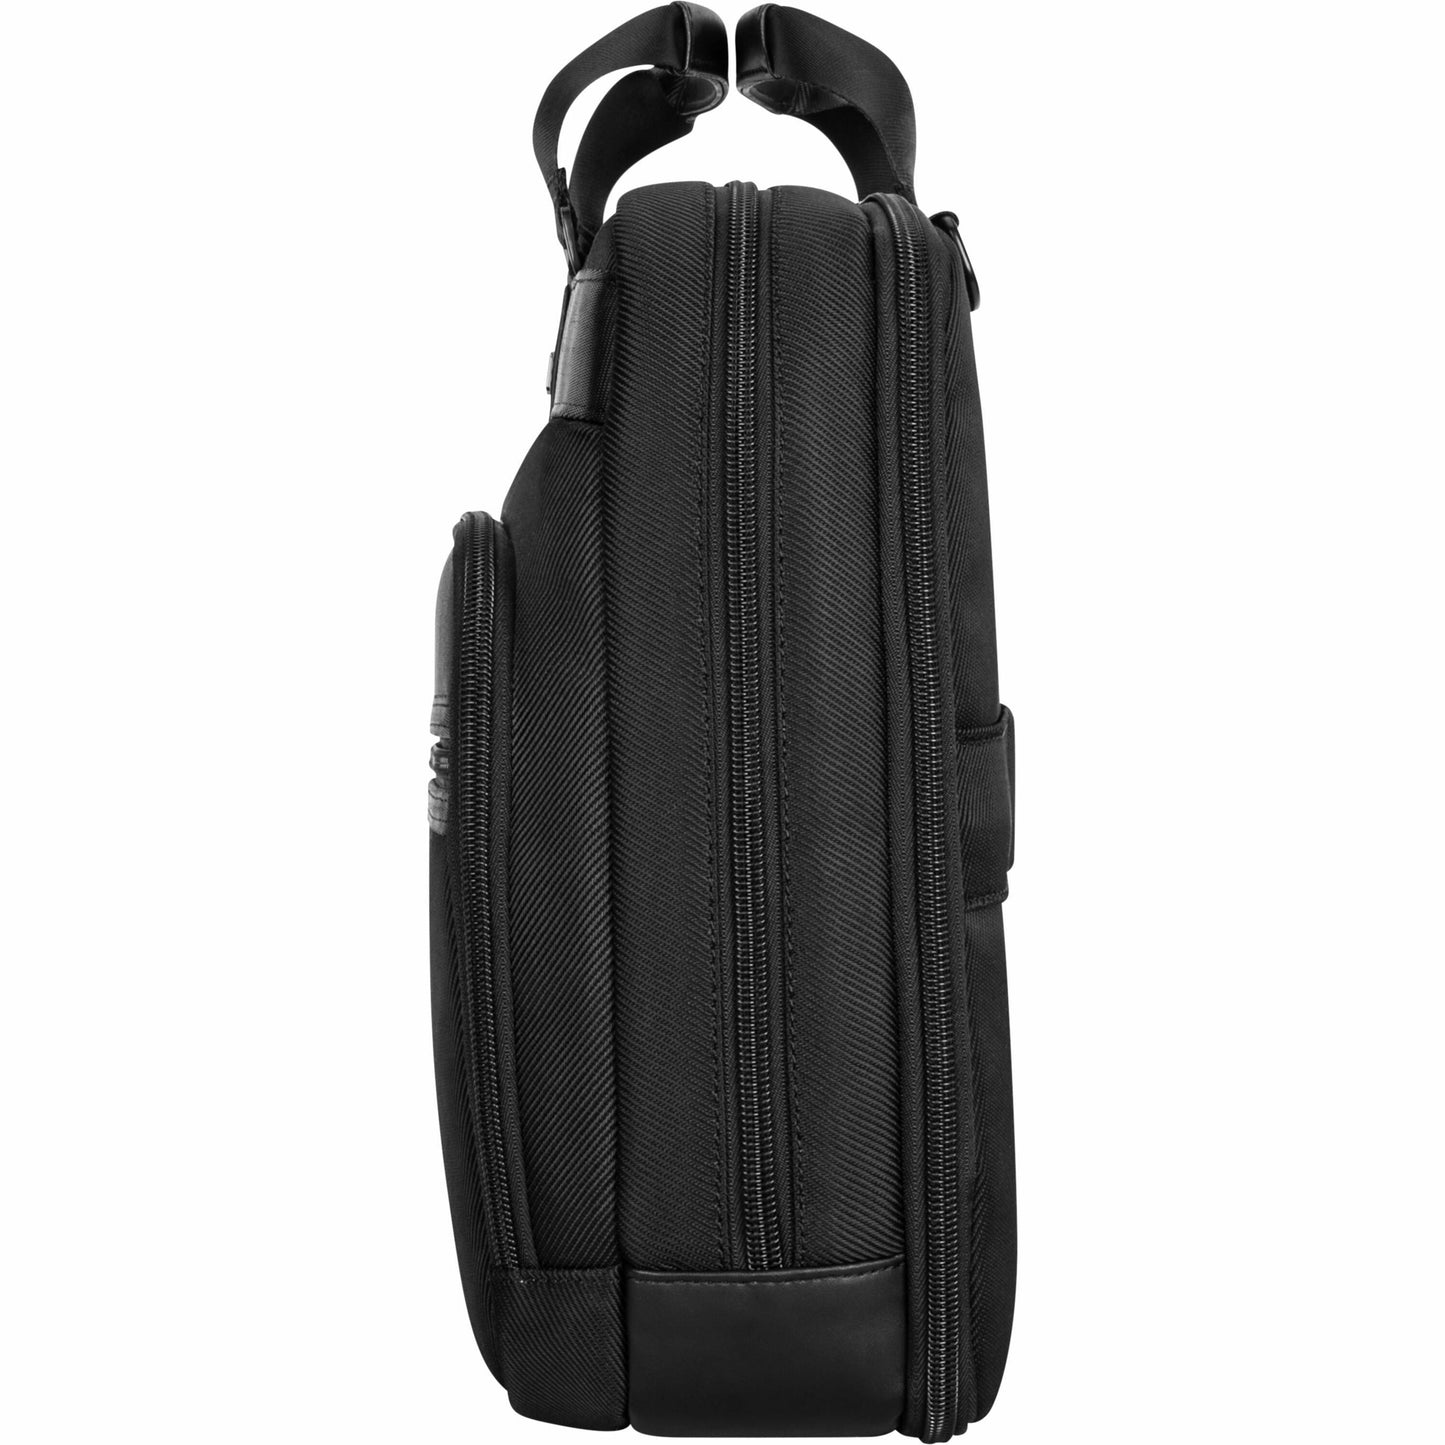 Targus Mobile Elite TBT045US Carrying Case (Briefcase) for 15" to 16" Notebook - Black Gray